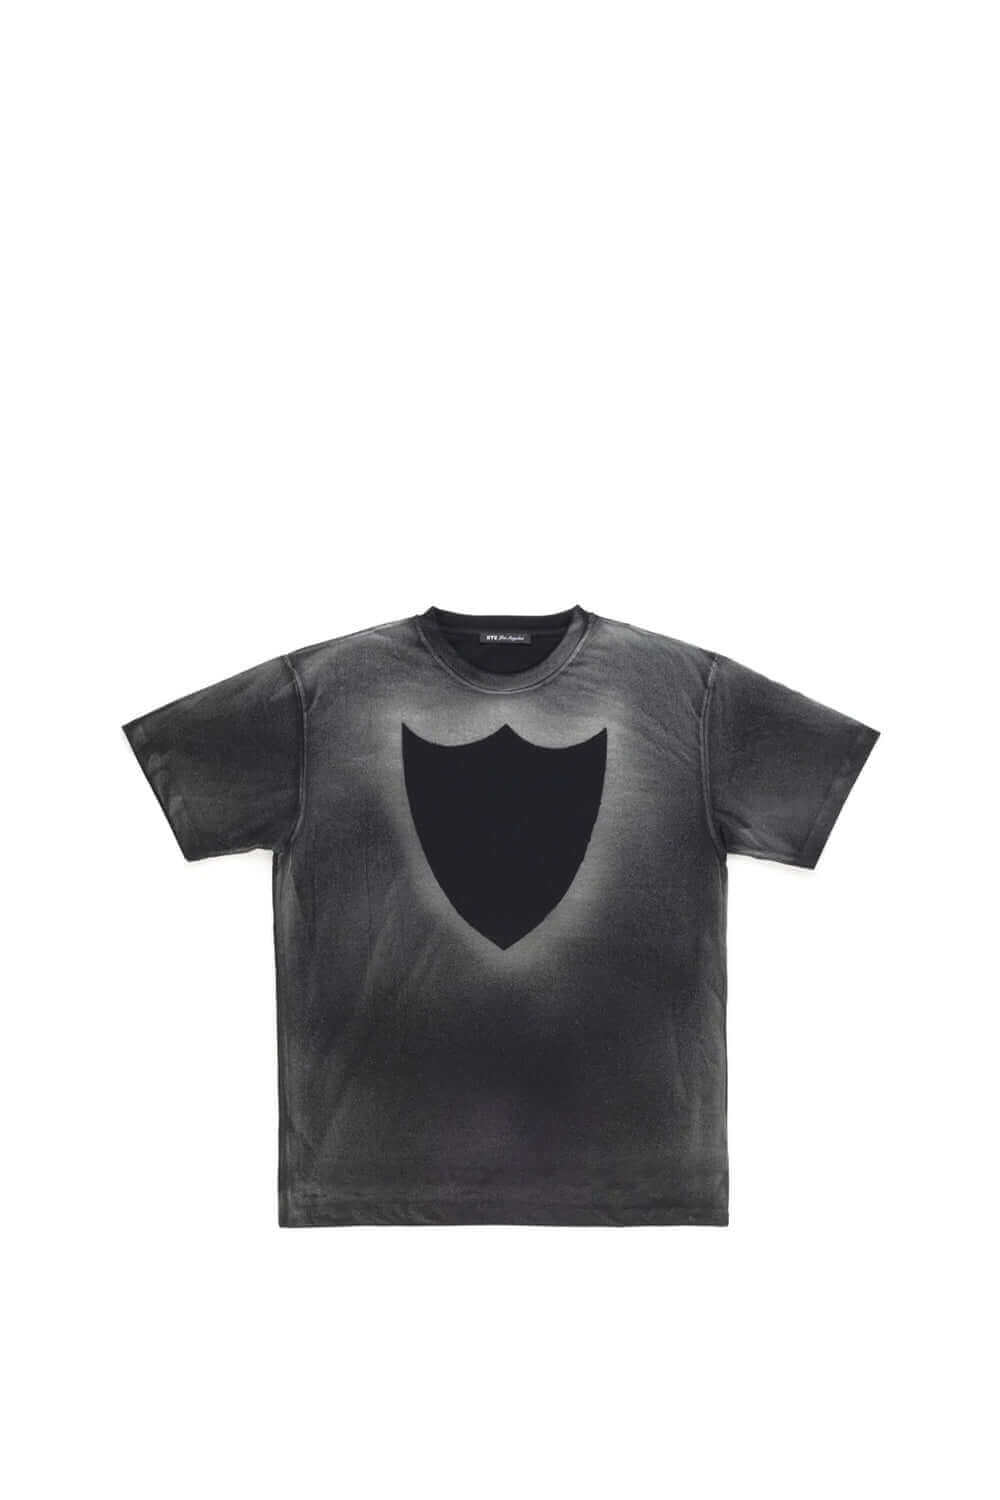 DARK SHIELD T-SHIRT Regular fit t-shirt with 'Cosmo' print and central logo. 100% cotton. Made in Italy. HTC LOS ANGELES